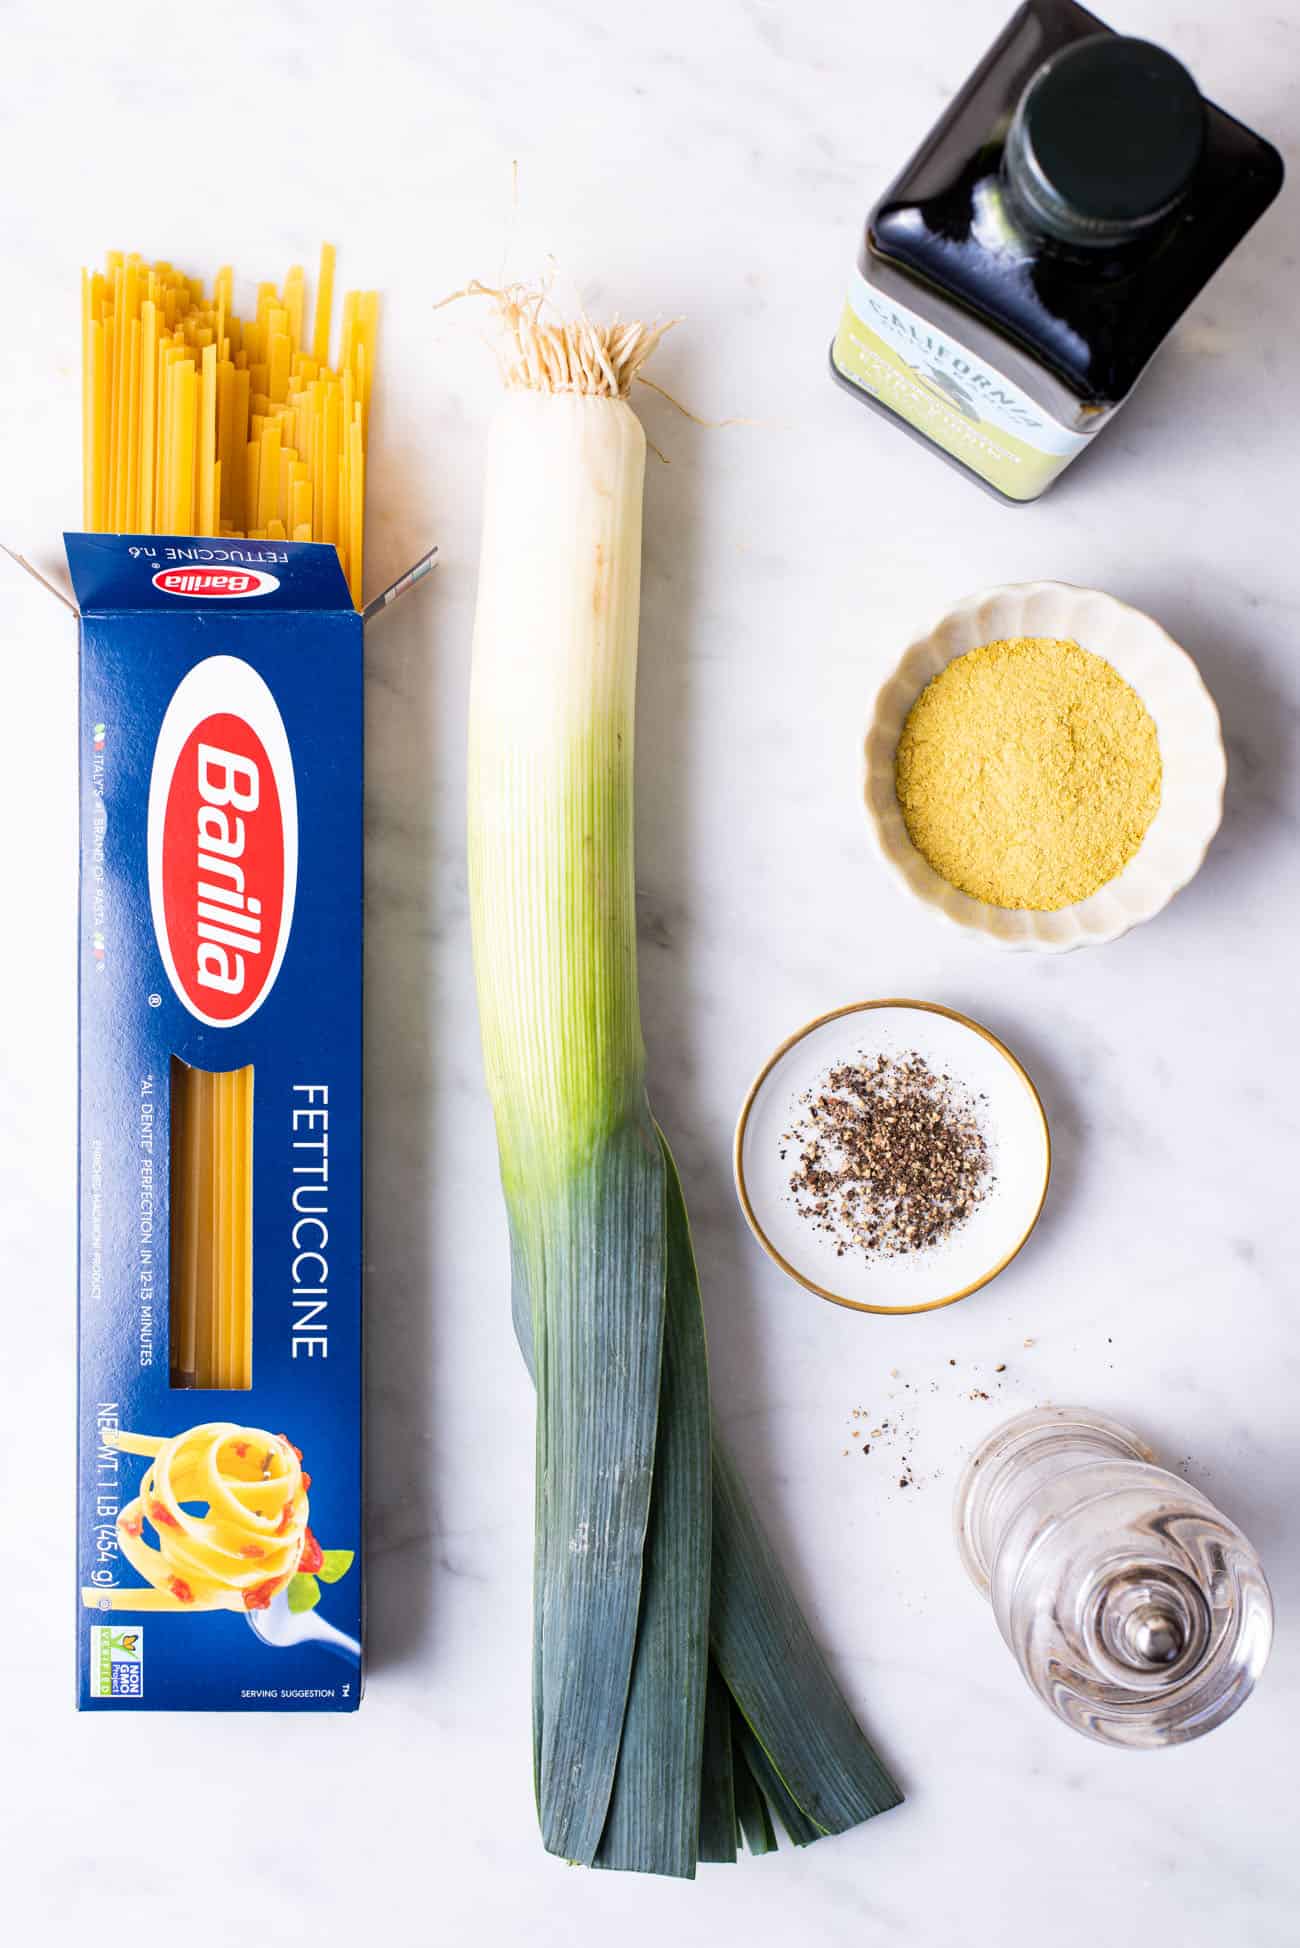 Barilla fettuccine, a leek, olive oil, nutritional yeast, and black pepper gathered on a marble counter